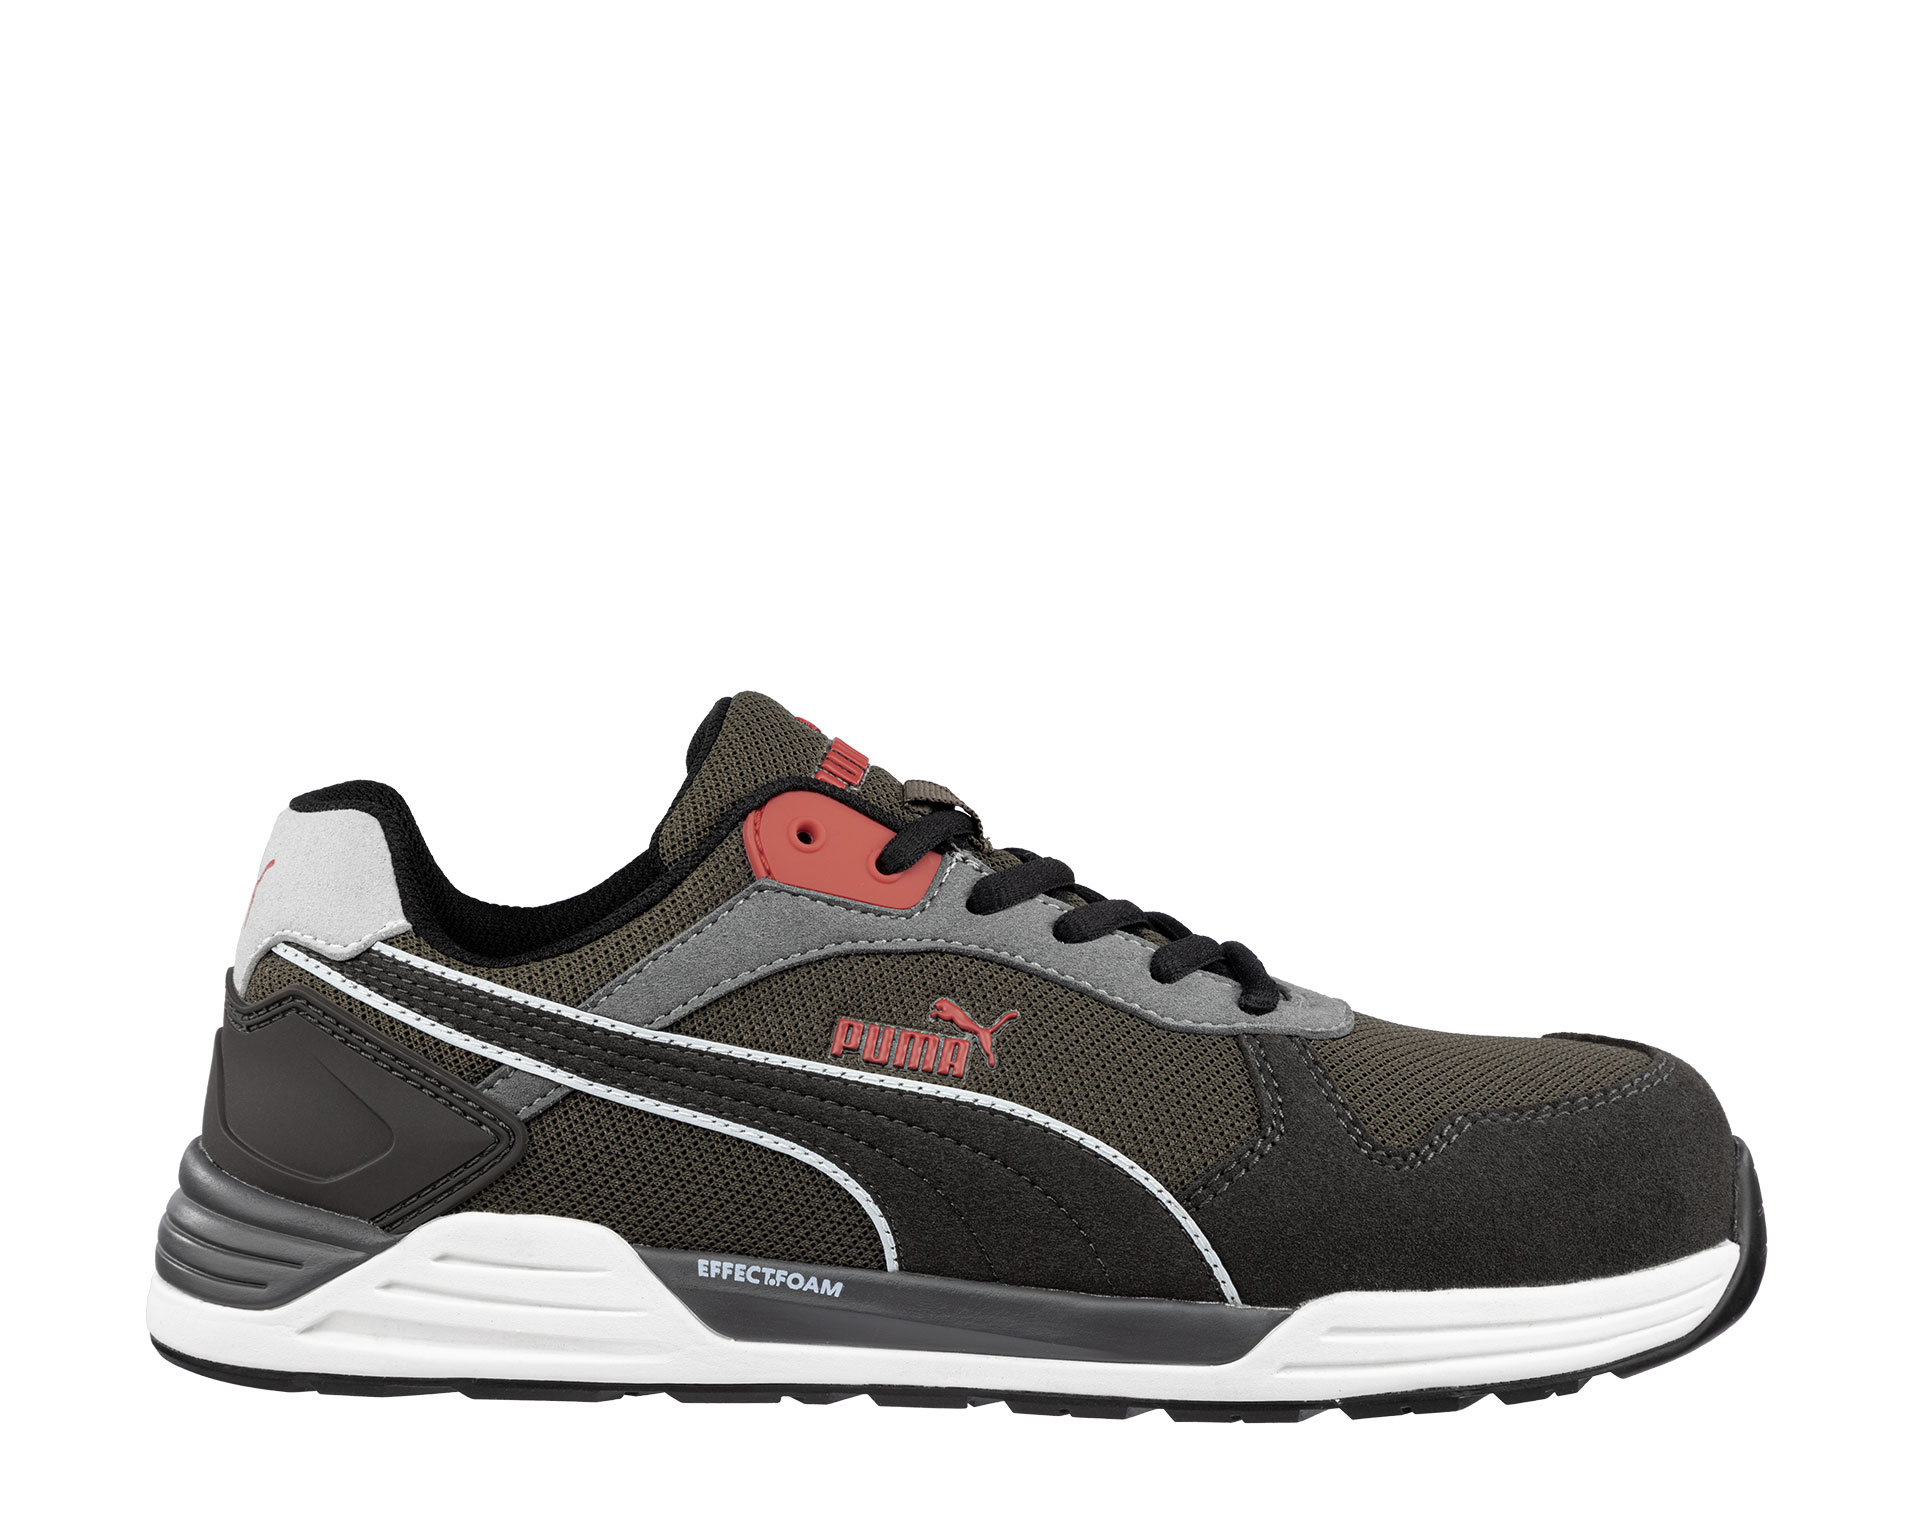 FRONTSIDE IVY LOW|PUMA SAFETY safety shoes S1P ESD | Puma Safety English